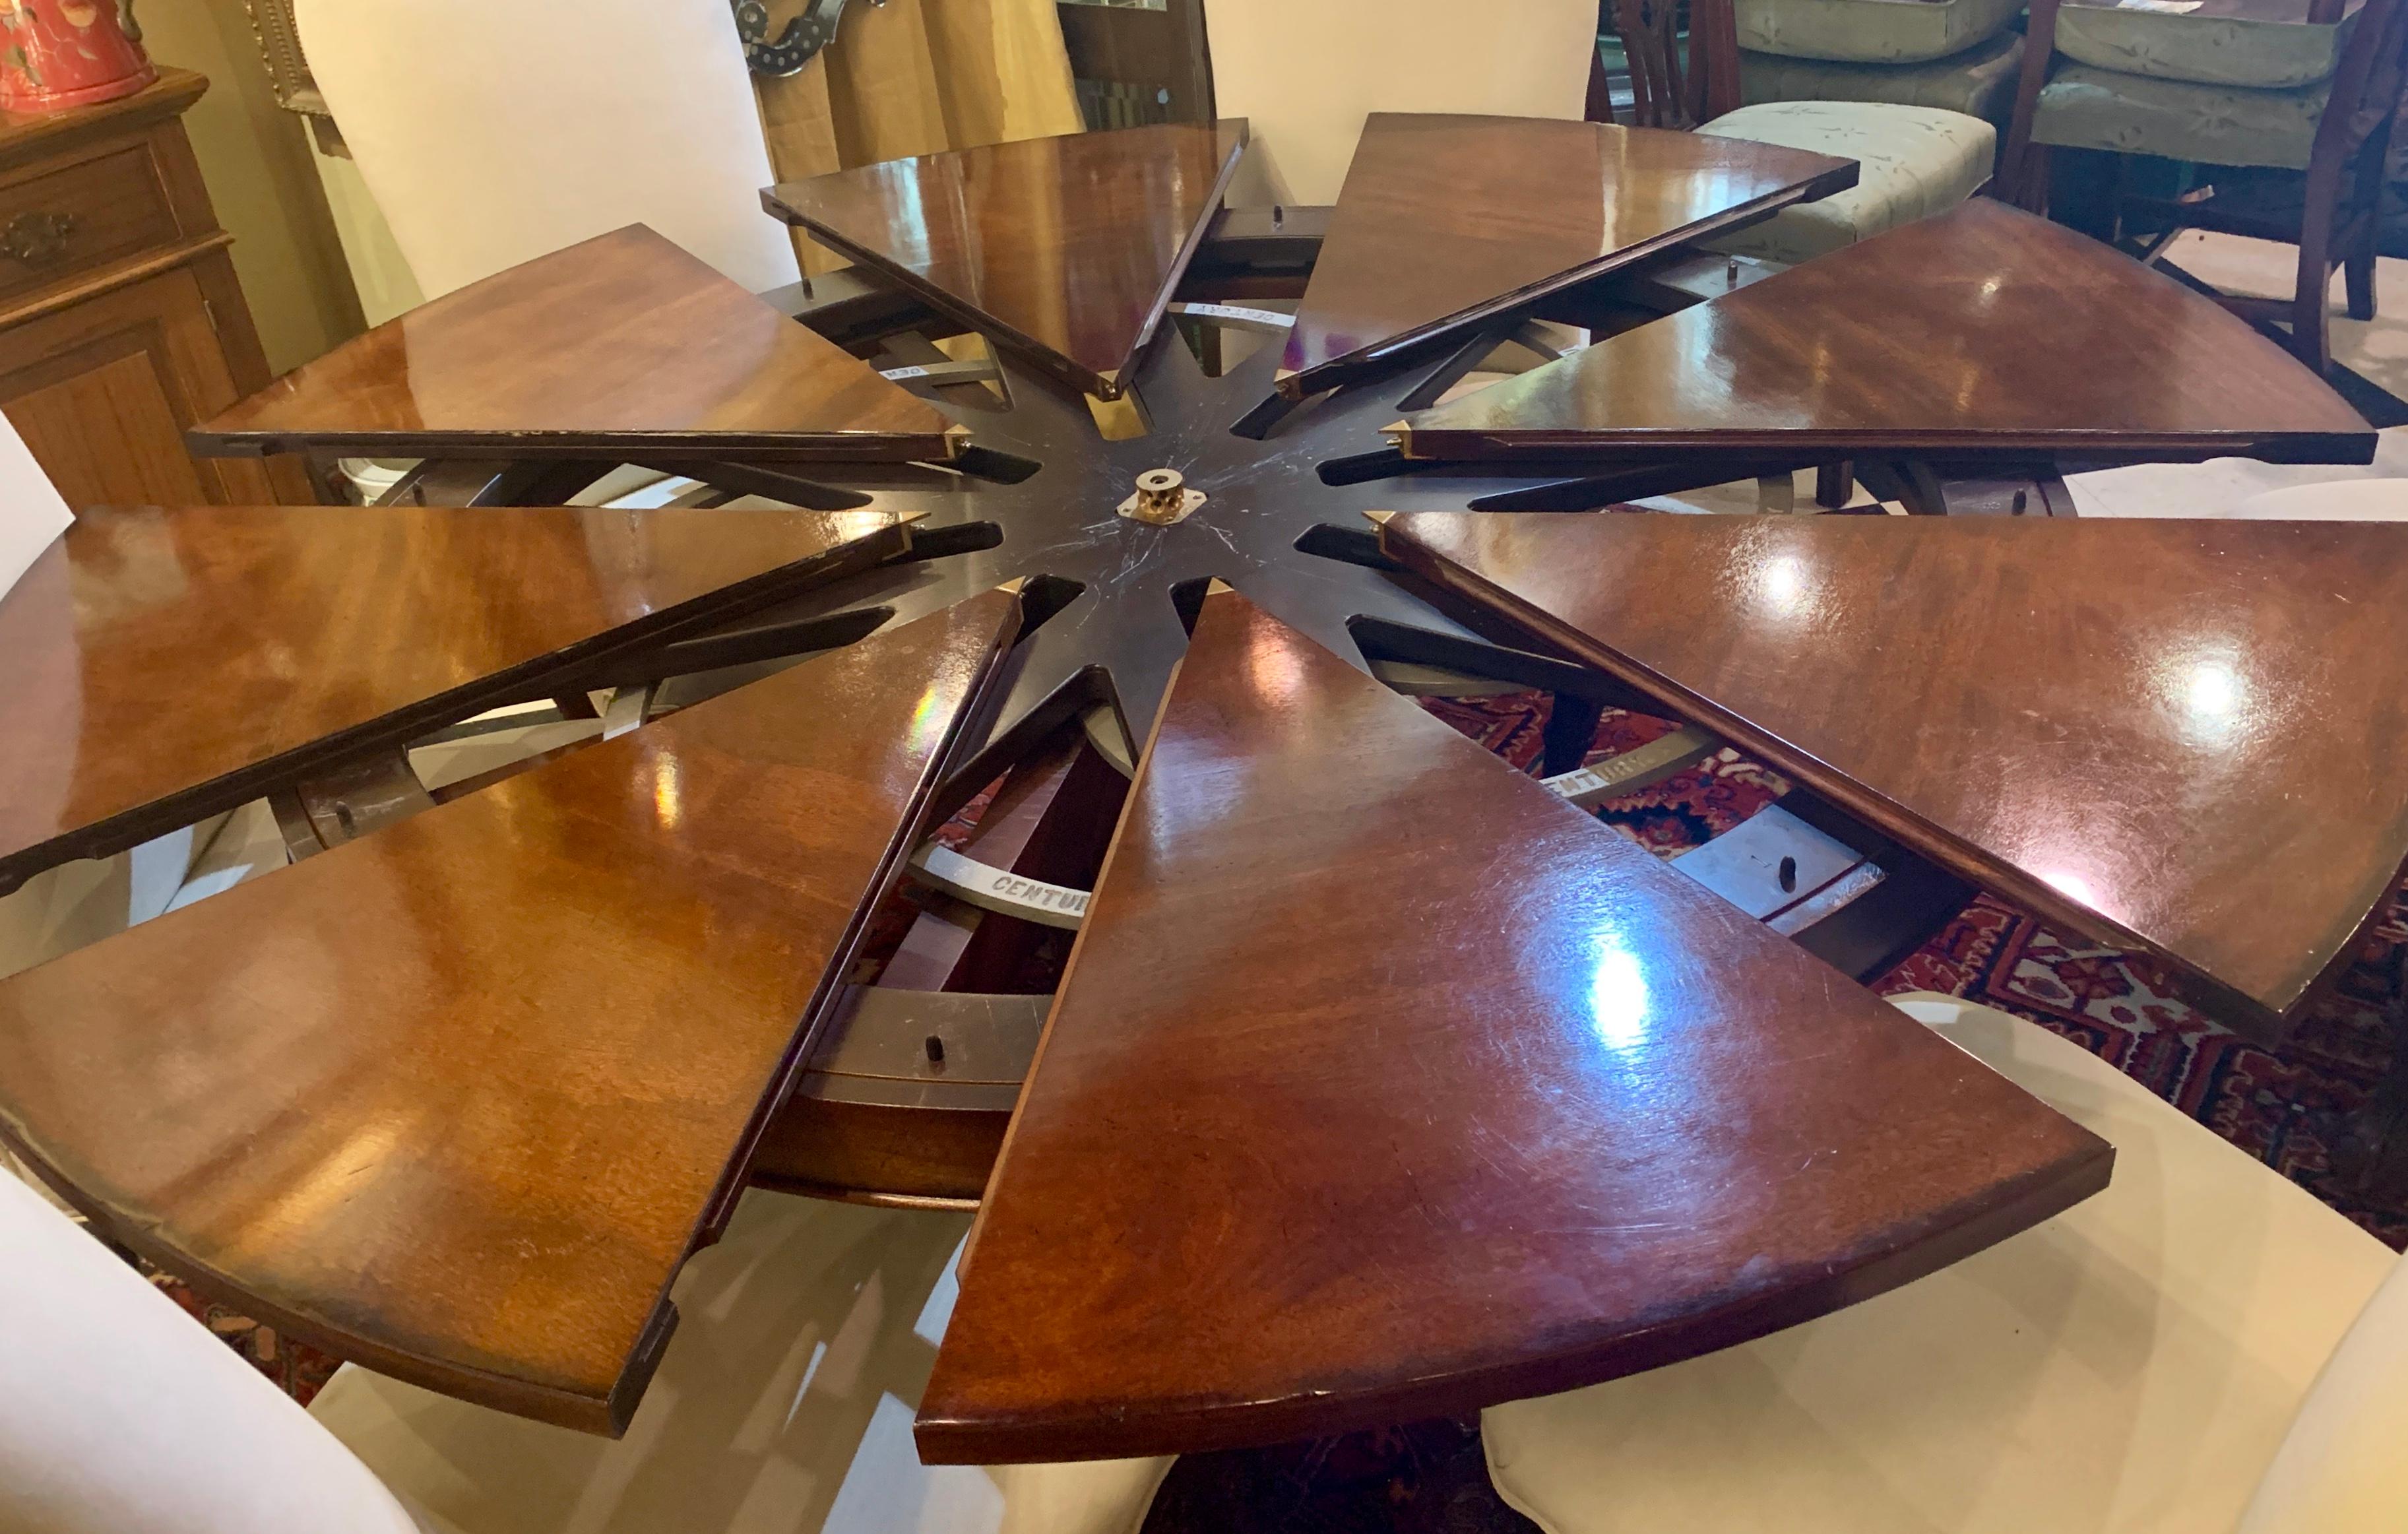 Chippendale Clever Oscar de la Renta Jupe Movement Expansion Round Dining Table and 8 Chairs